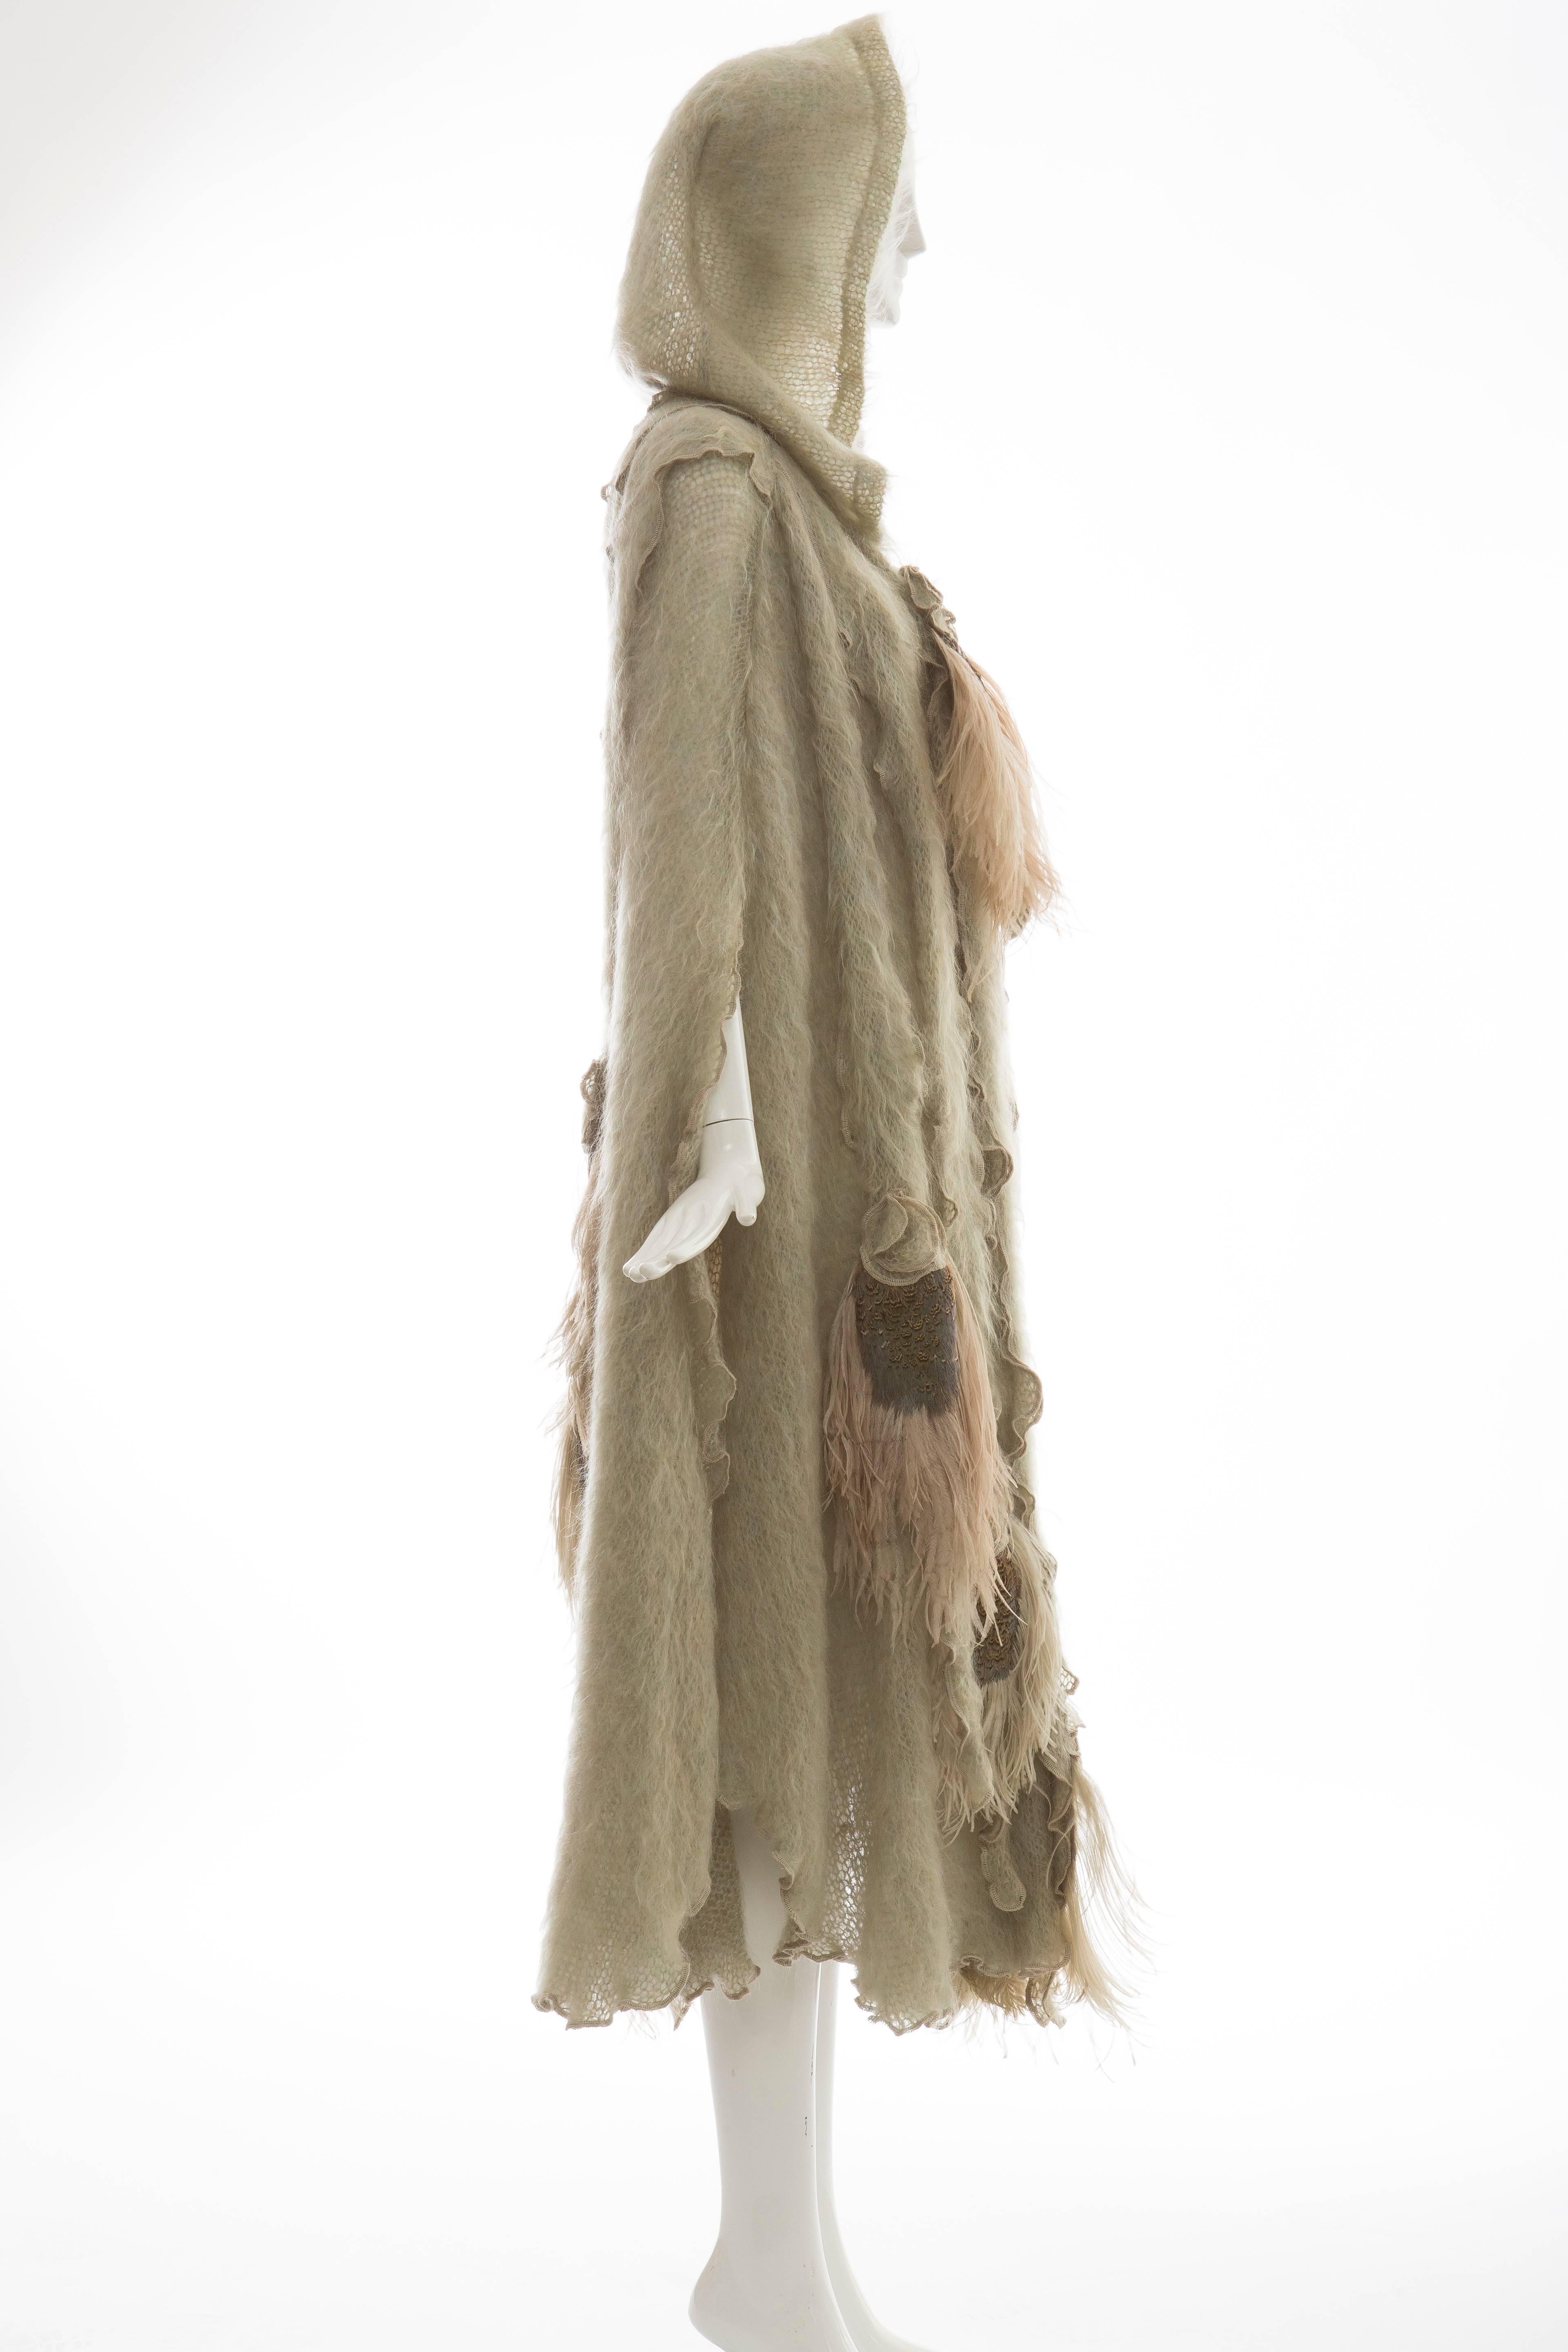 Brown Diana Leslie For Animal Rainbow Sage Green Hooded Mohair Cape, Circa 1980's